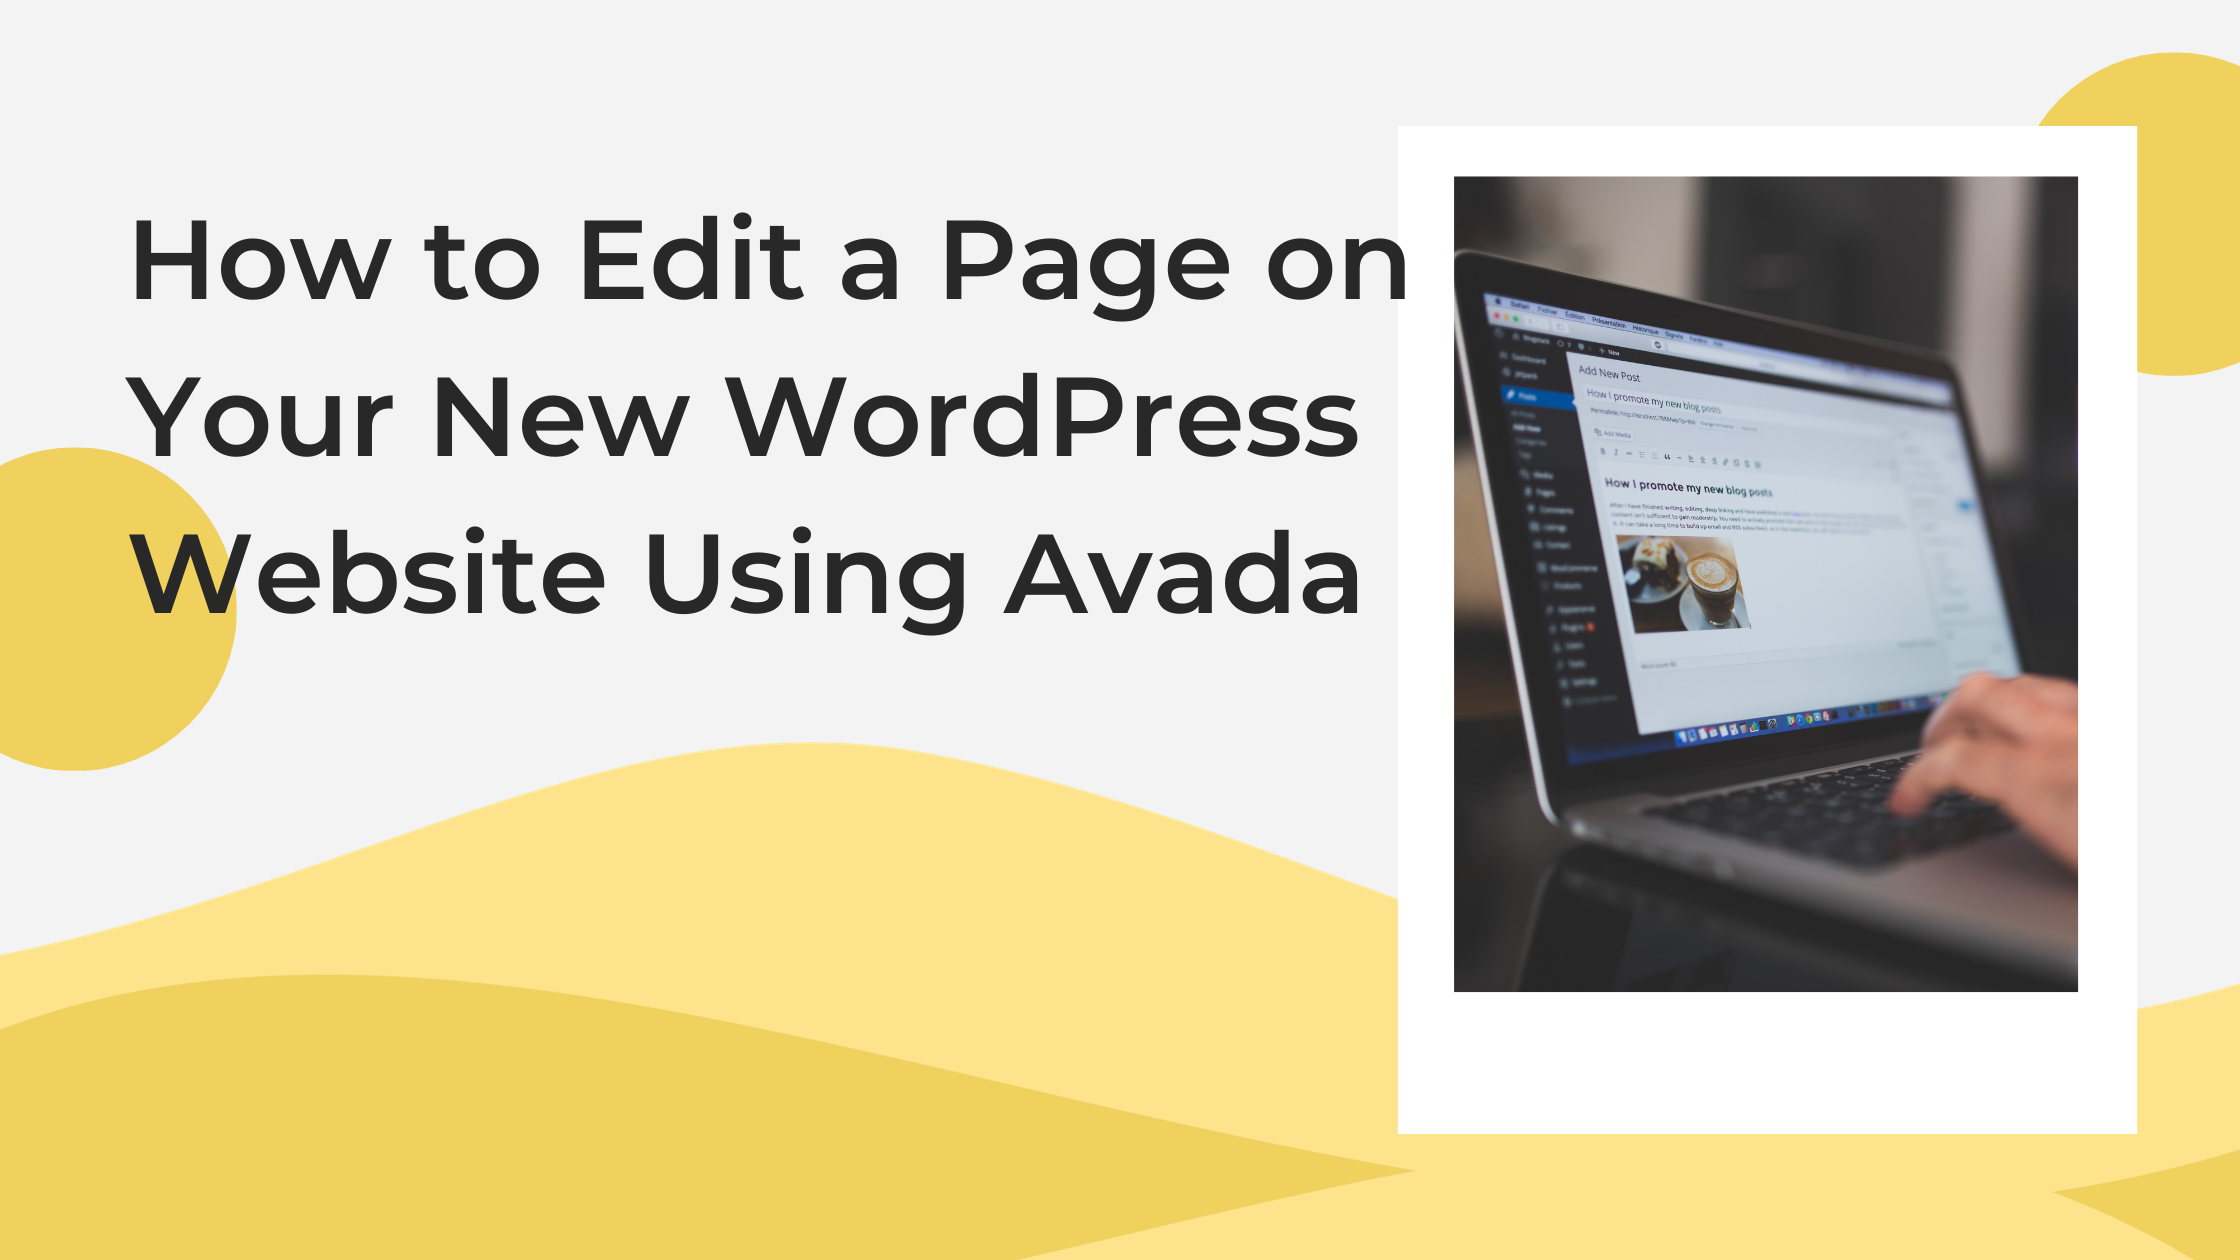 Blog cover for how to edit a page on wordpress using avada.